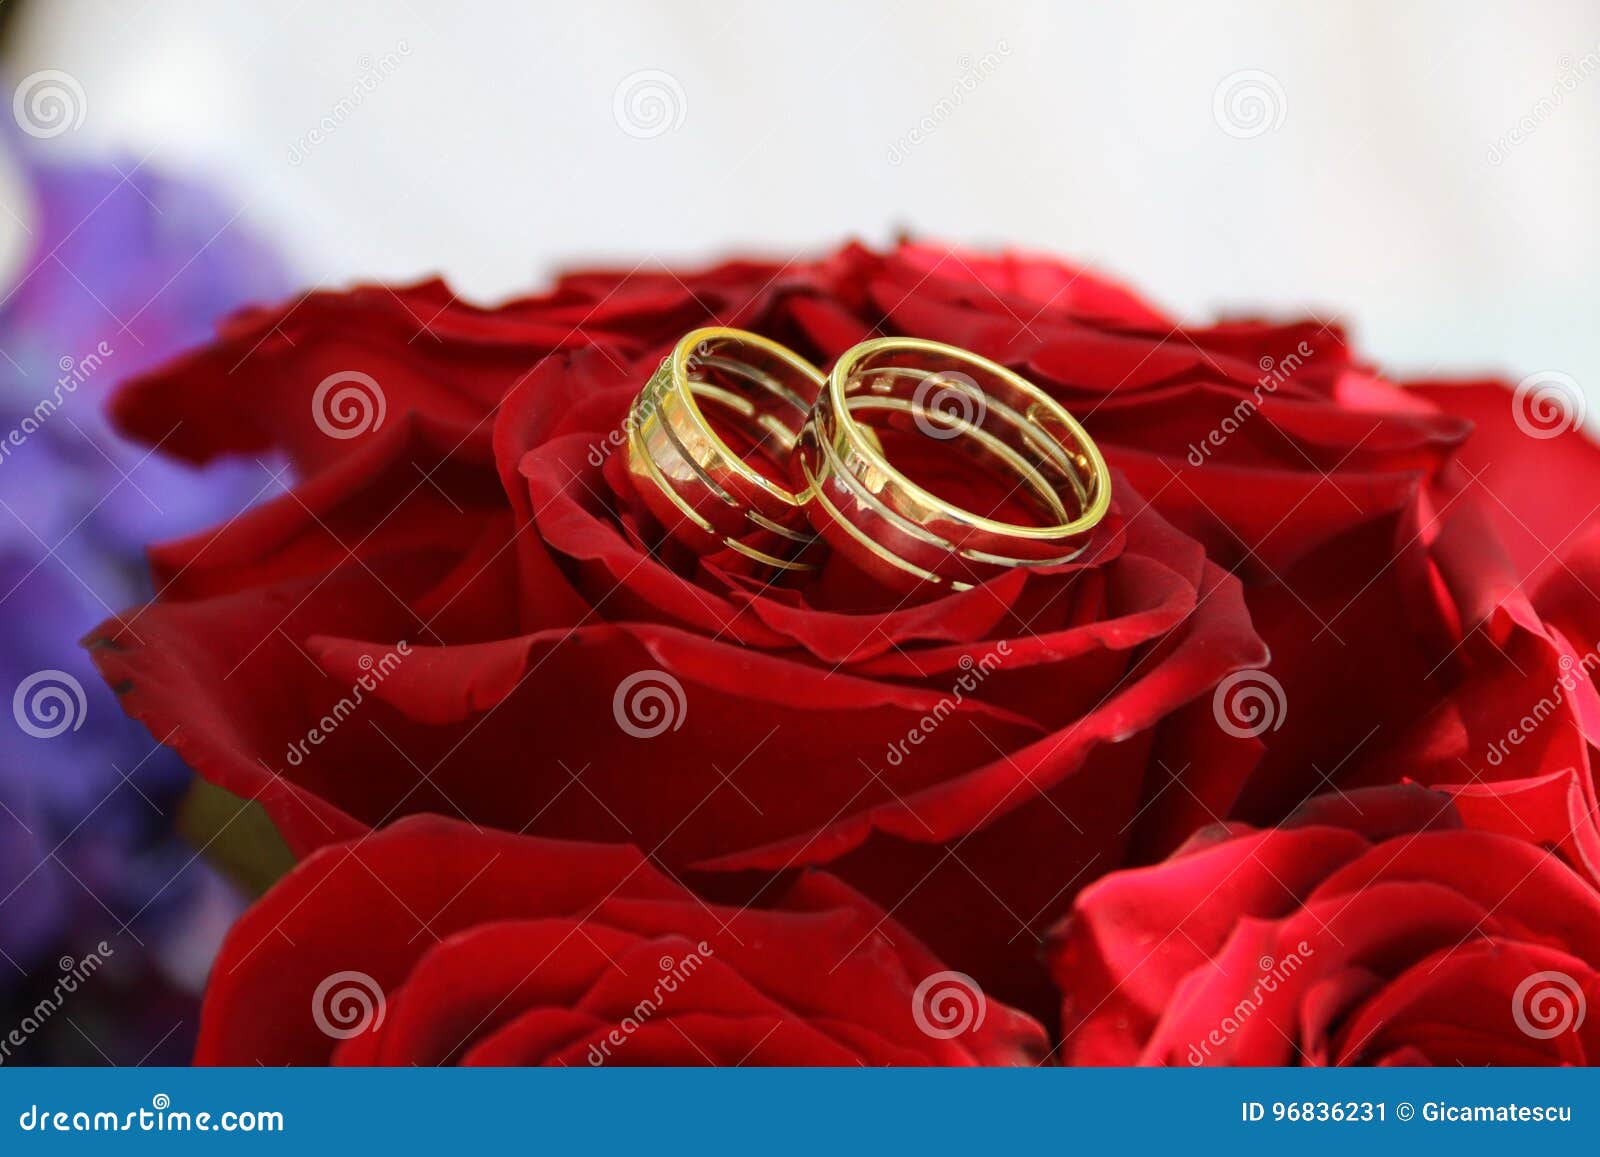 rings for marriage